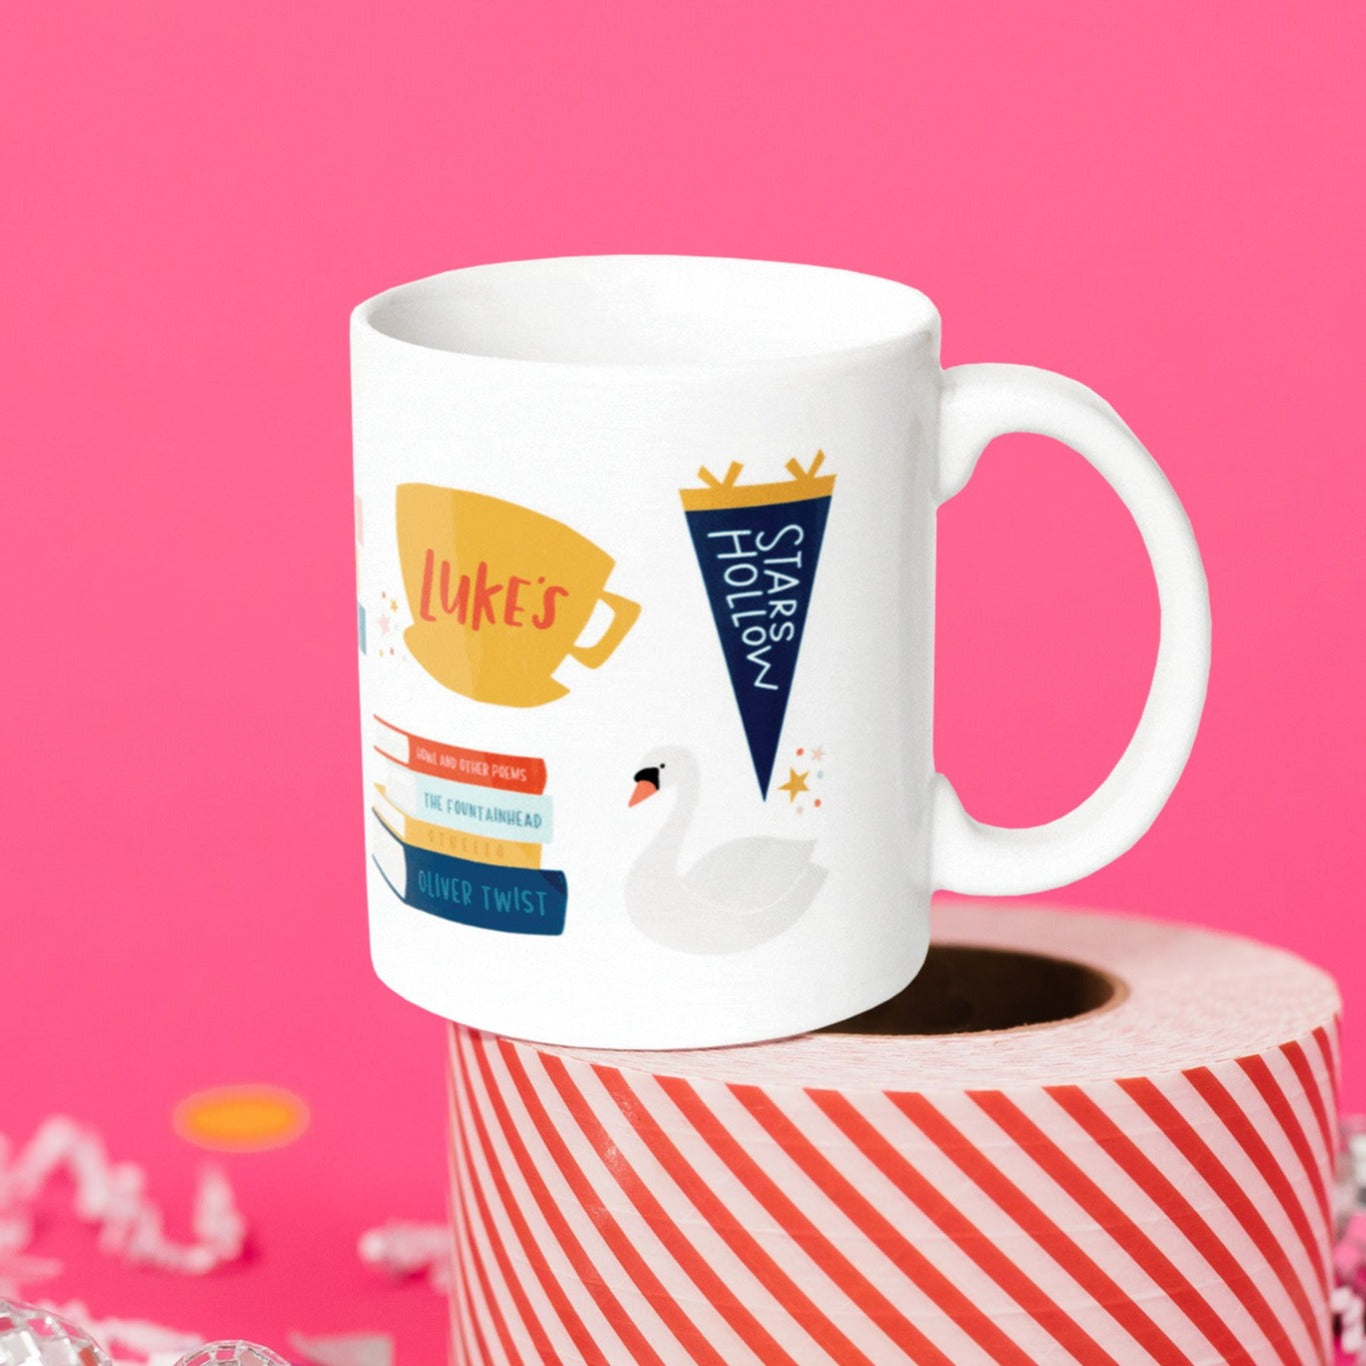 On a hot pink background sits a mug atop a red and white striped roll of packing tape with white crinkle and big, colorful confetti scattered around. There are mini disco balls. This Gilmore Girls inspired white mug has colorful illustrations from the show. It has a coffee mug that says “Luke's"and there are a stack of books, a swan, and a navy school banner that says "STARS HOLLOW.”